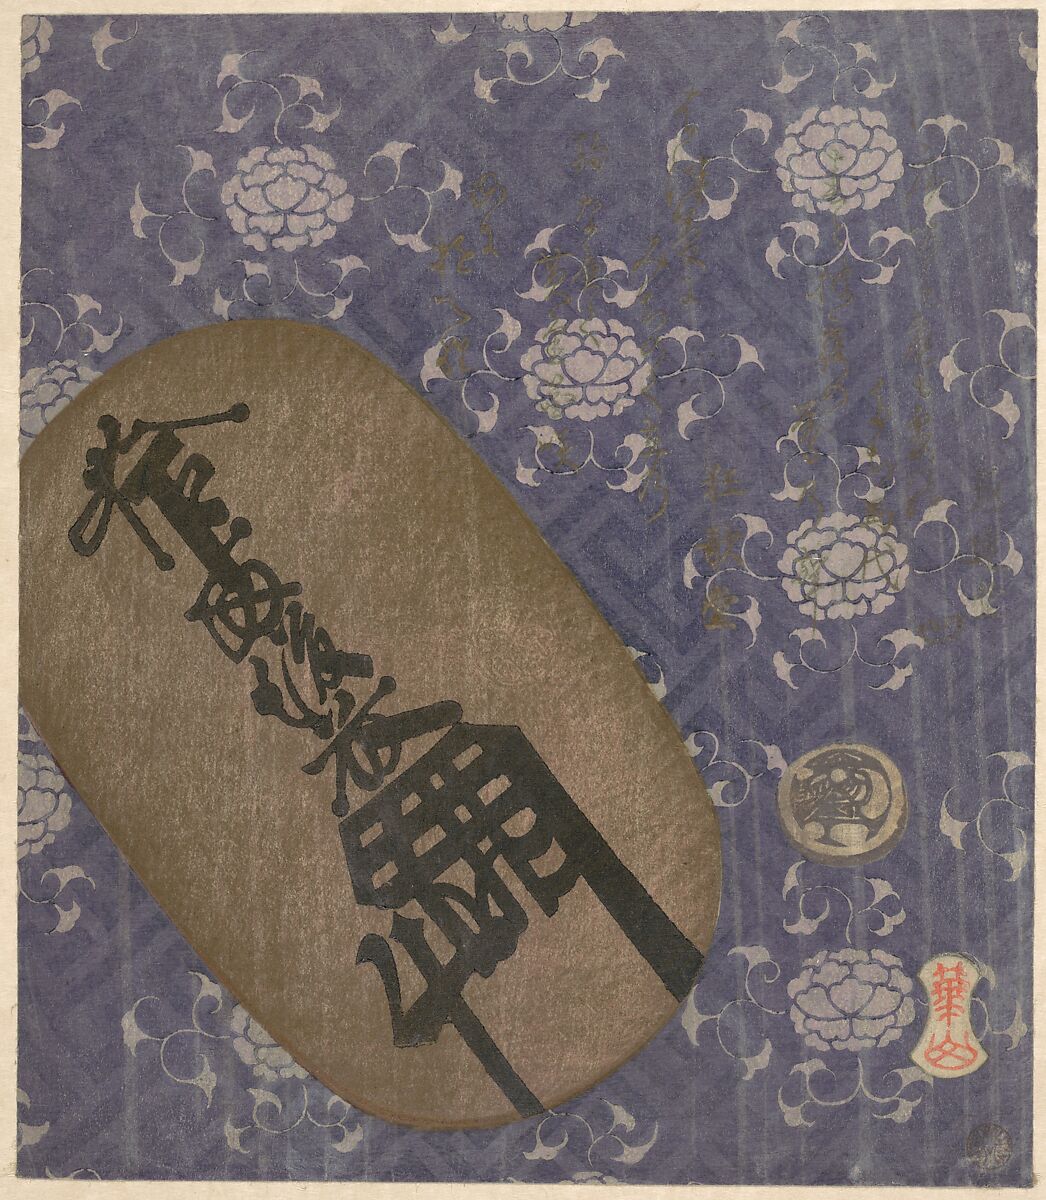 Ōban gold coin and mameita-gin silver “bean coin” against peony-motif decorated paper, Watanabe Kazan (Japanese, died 1841), Woodblock print (surimono); ink and color on paper, Japan 